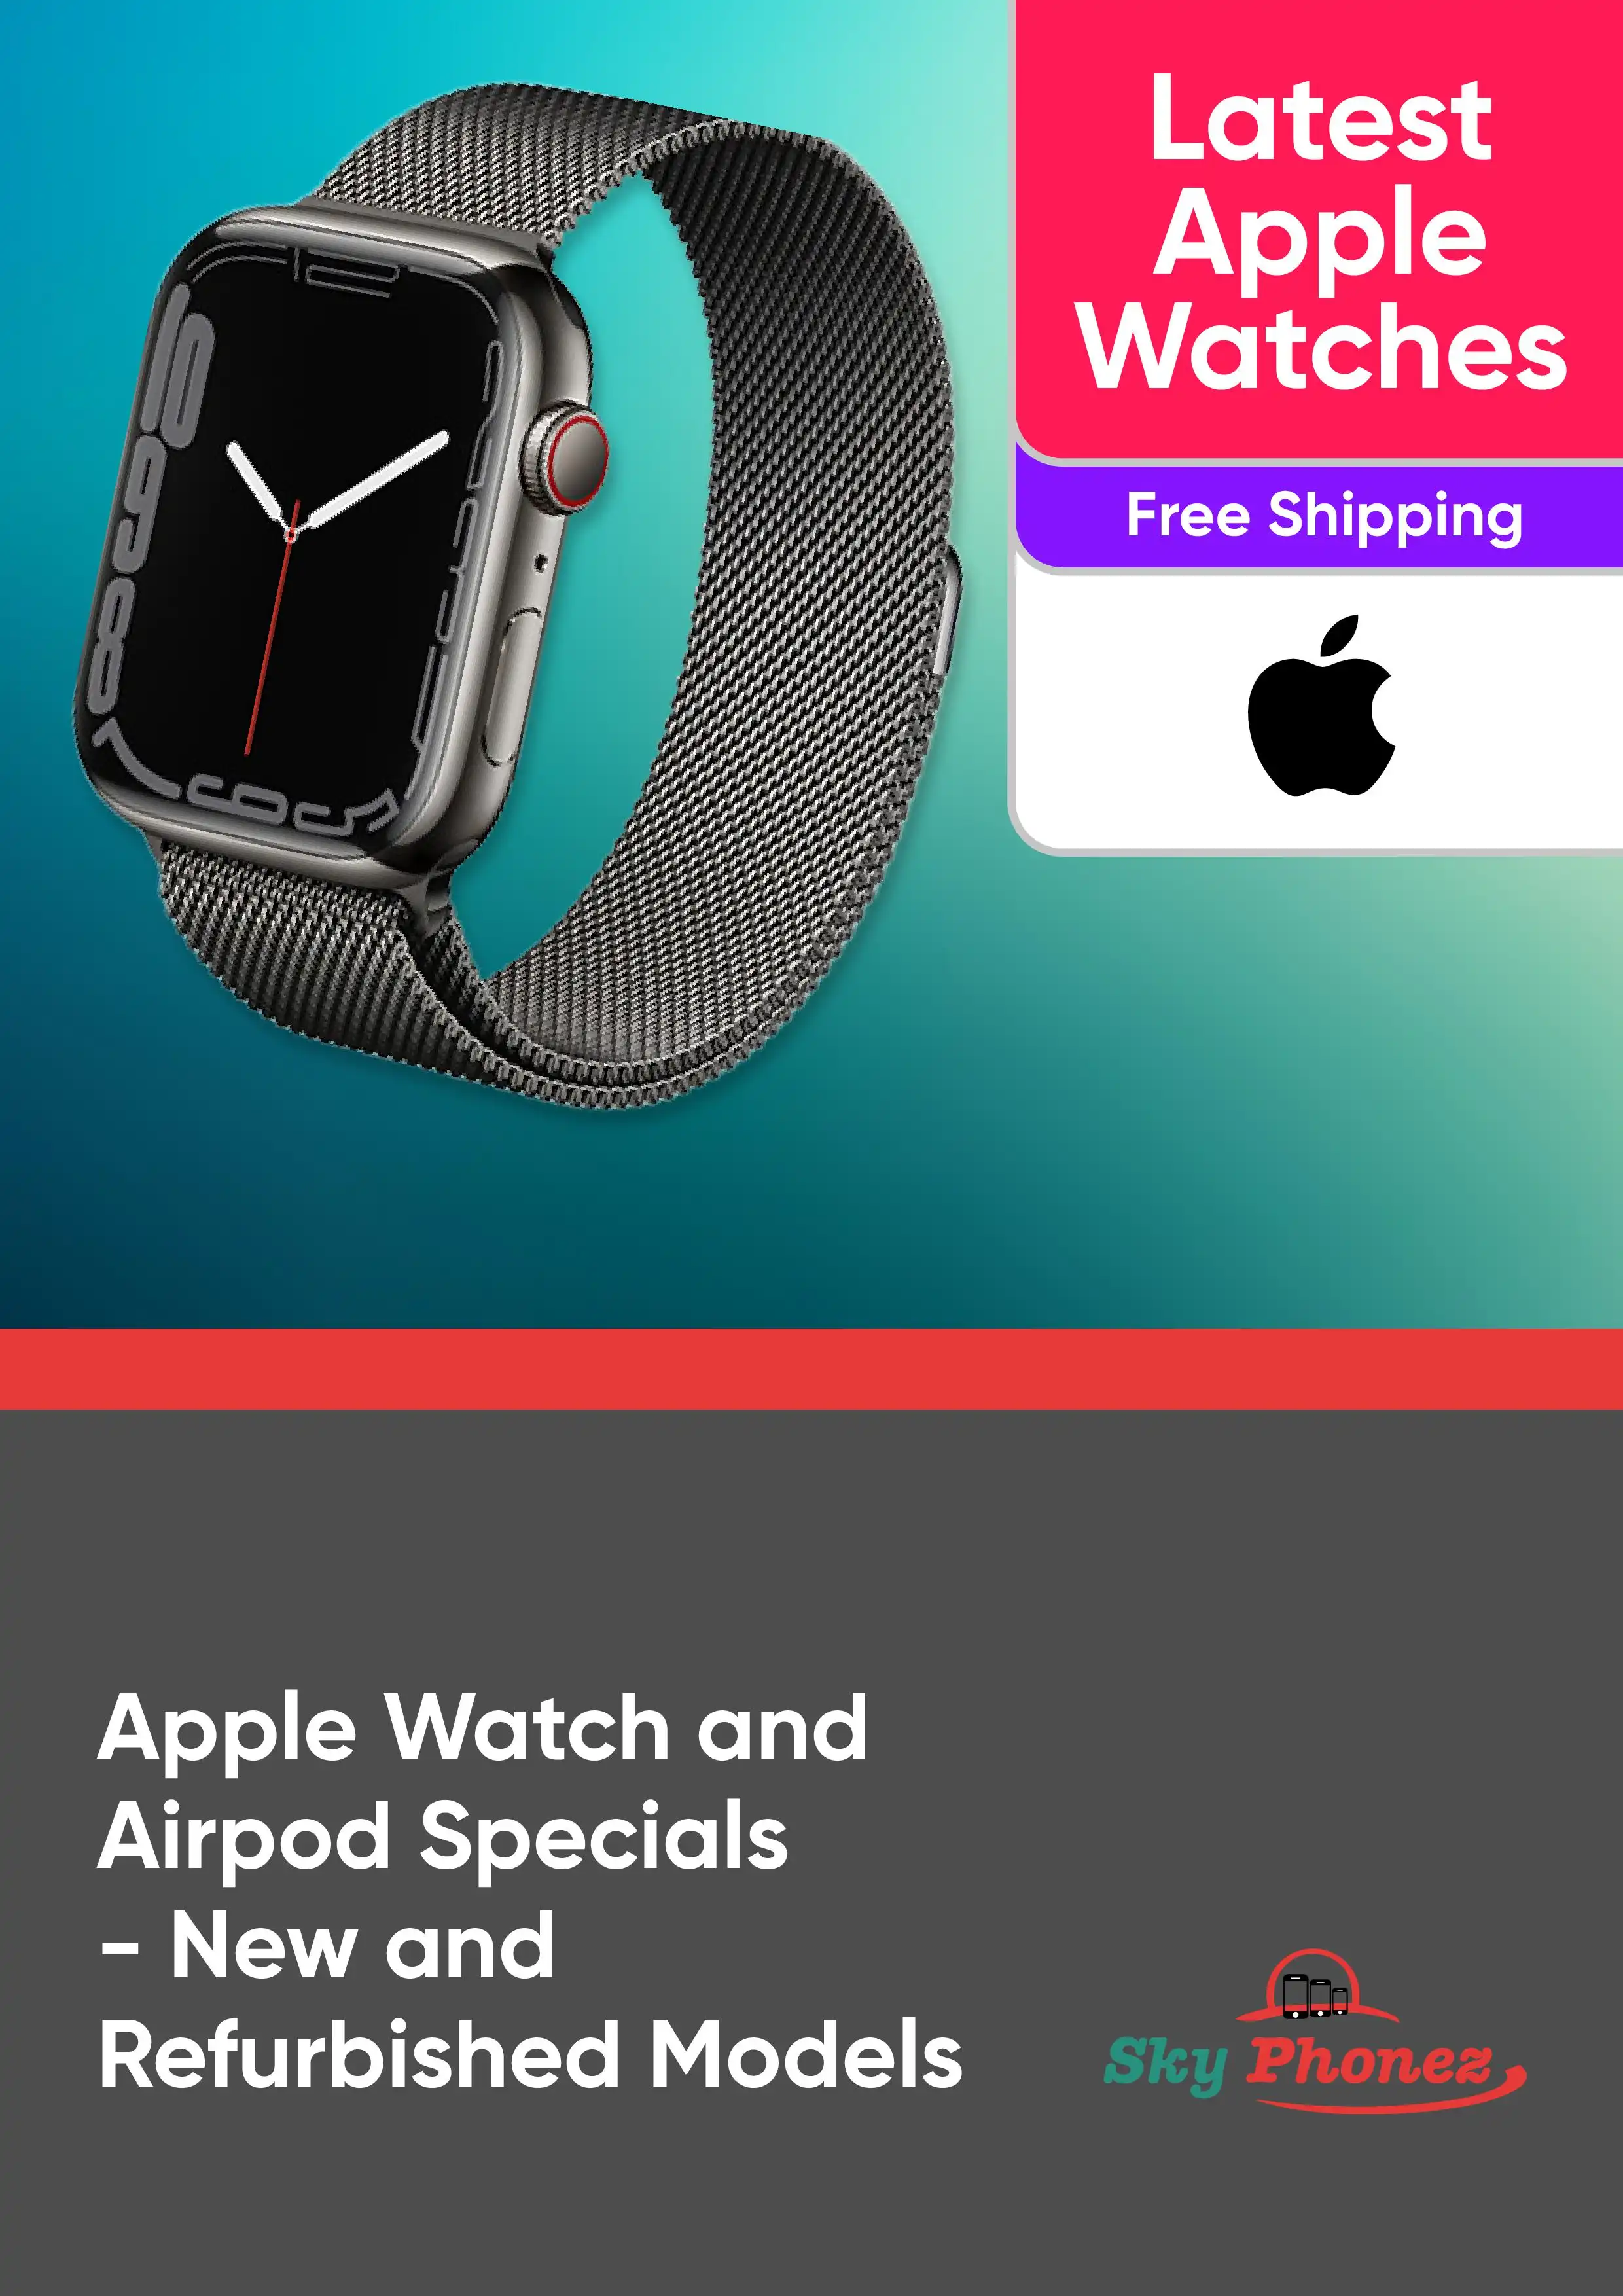 Apple Watch and AirPod Specials - New and Refurbished Models